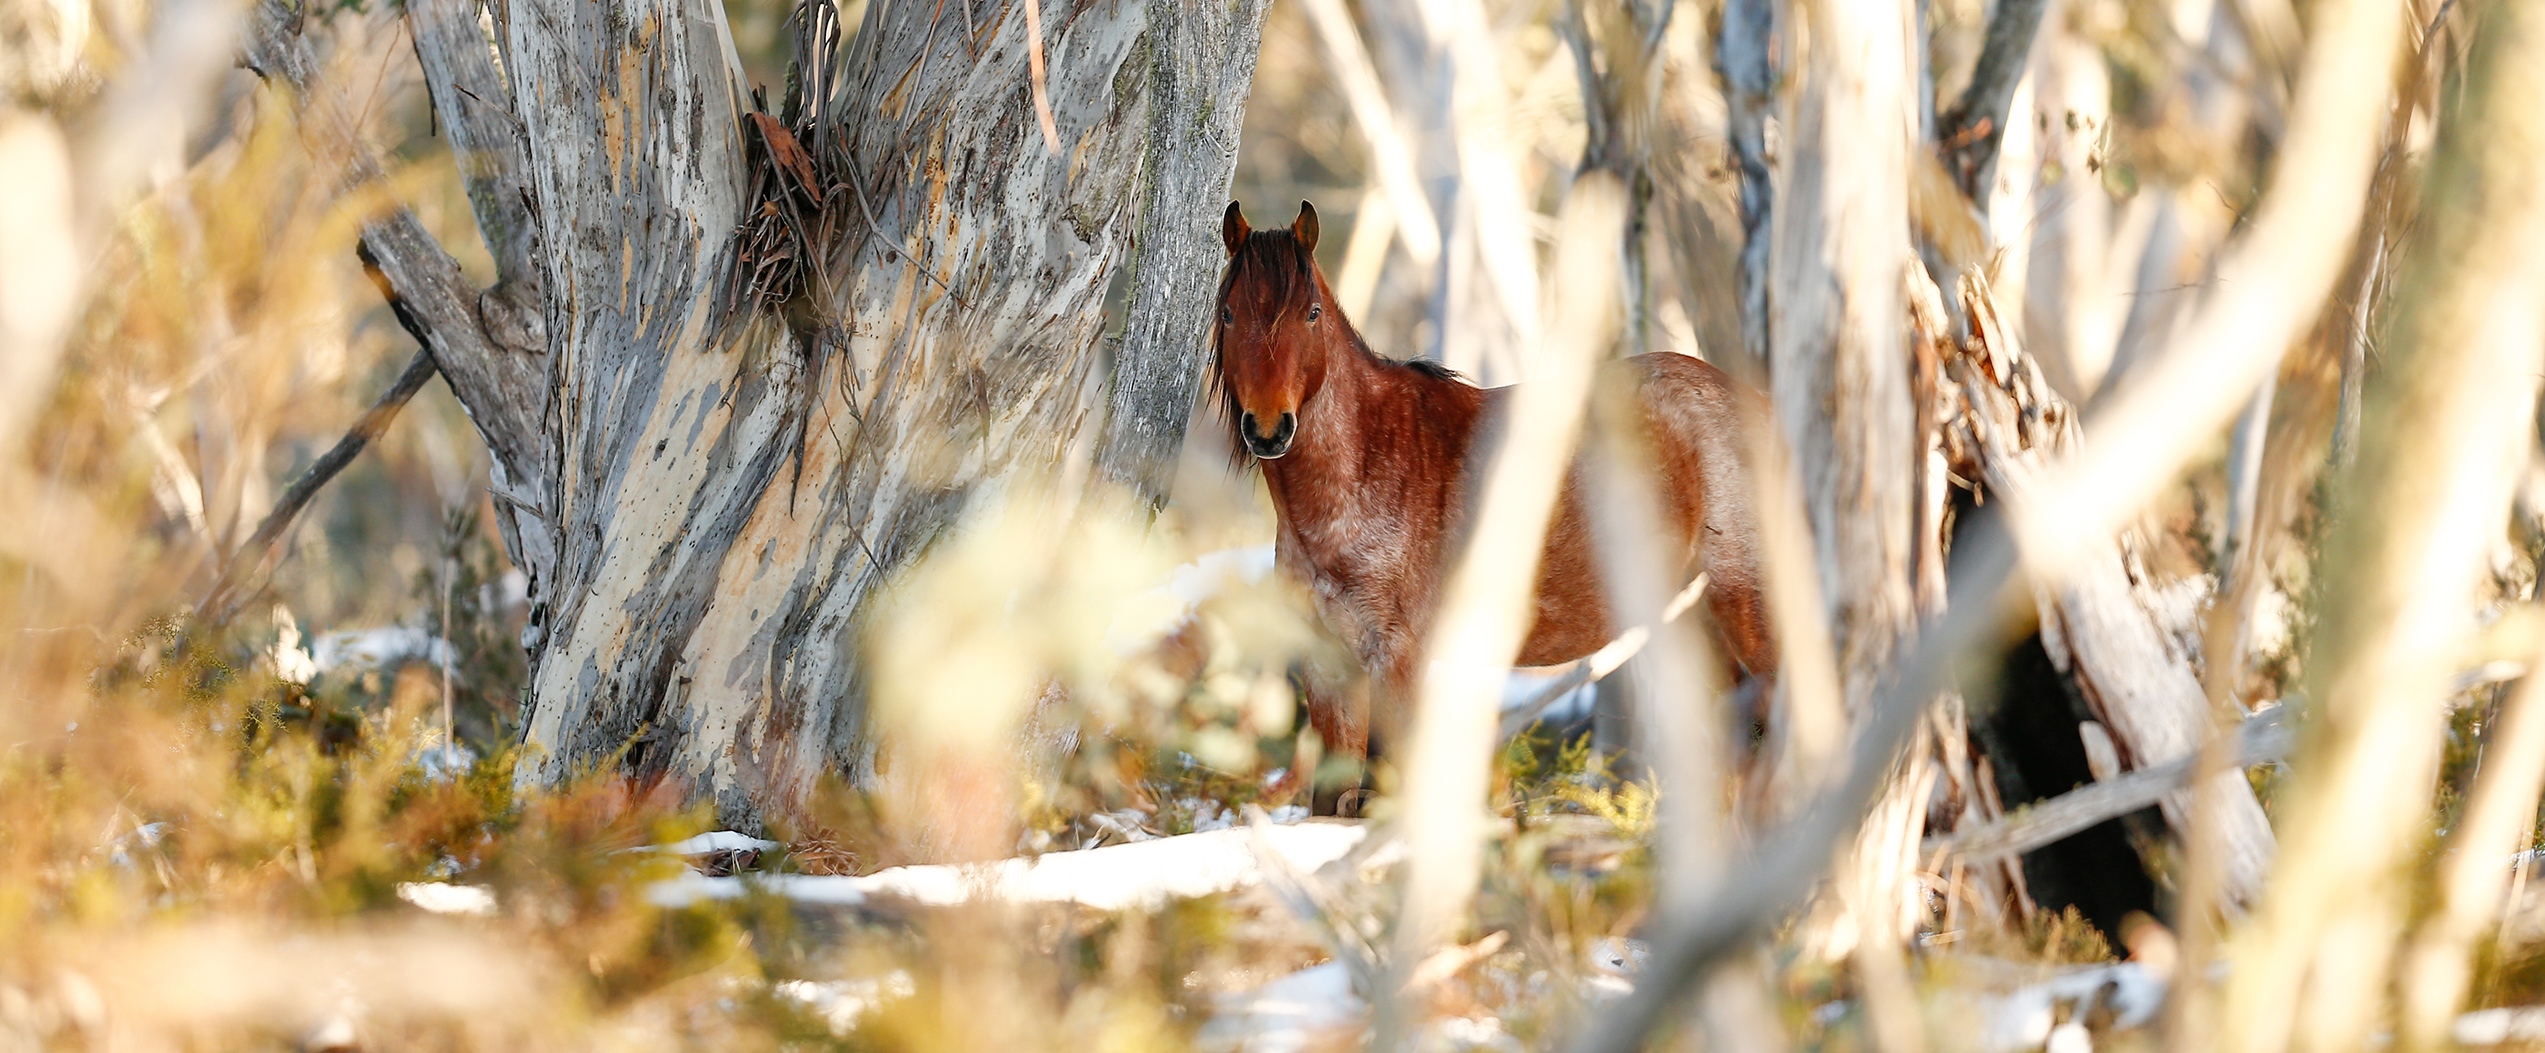 Reunited with the Roan Bachelor: Australian Snowy Mountains, Wild Horses of the World